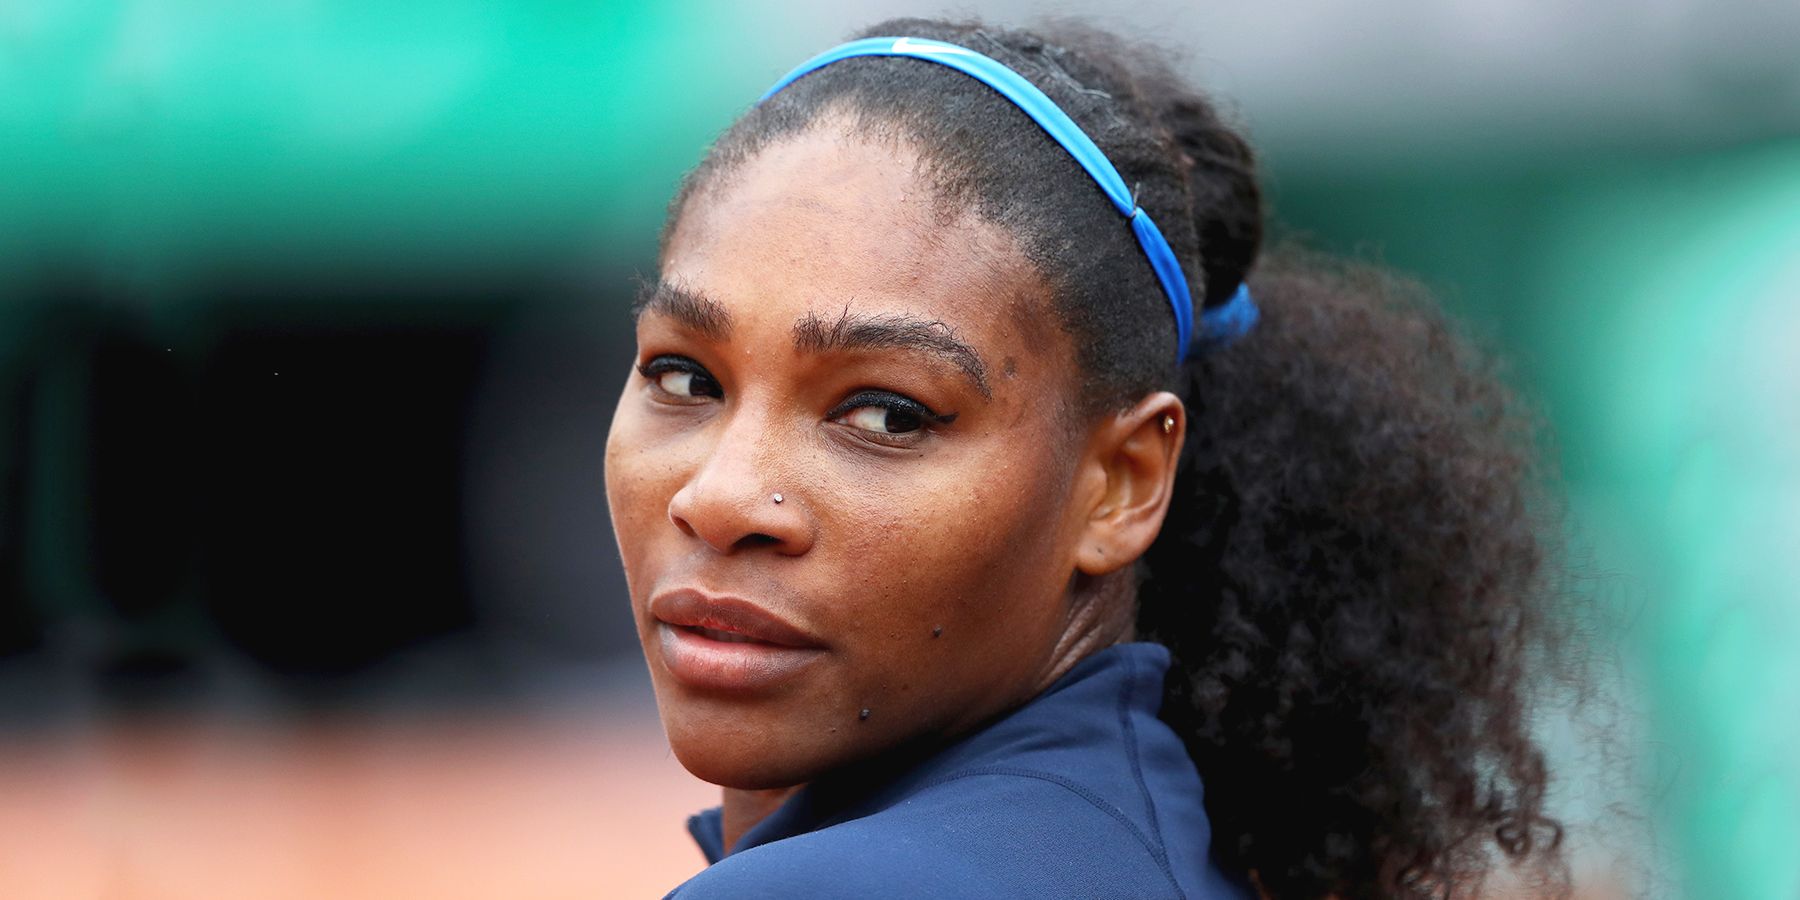 serena rae look serena williams got body shamed haters for wearing this serena williams